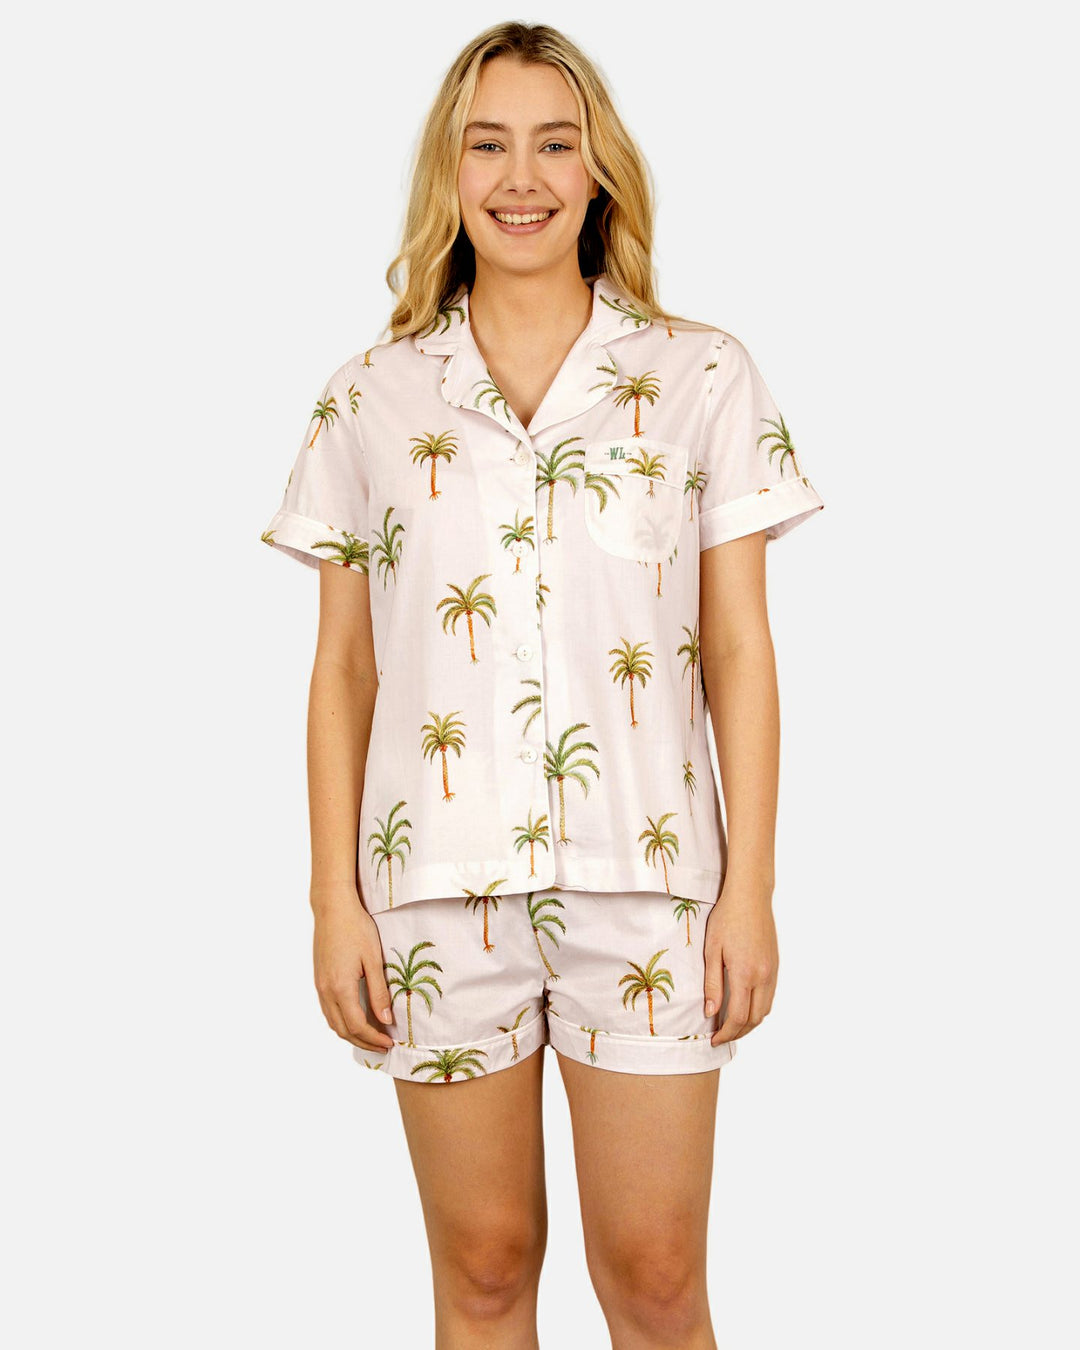 Womens short sleeved cream colored pyjamas with palm trees